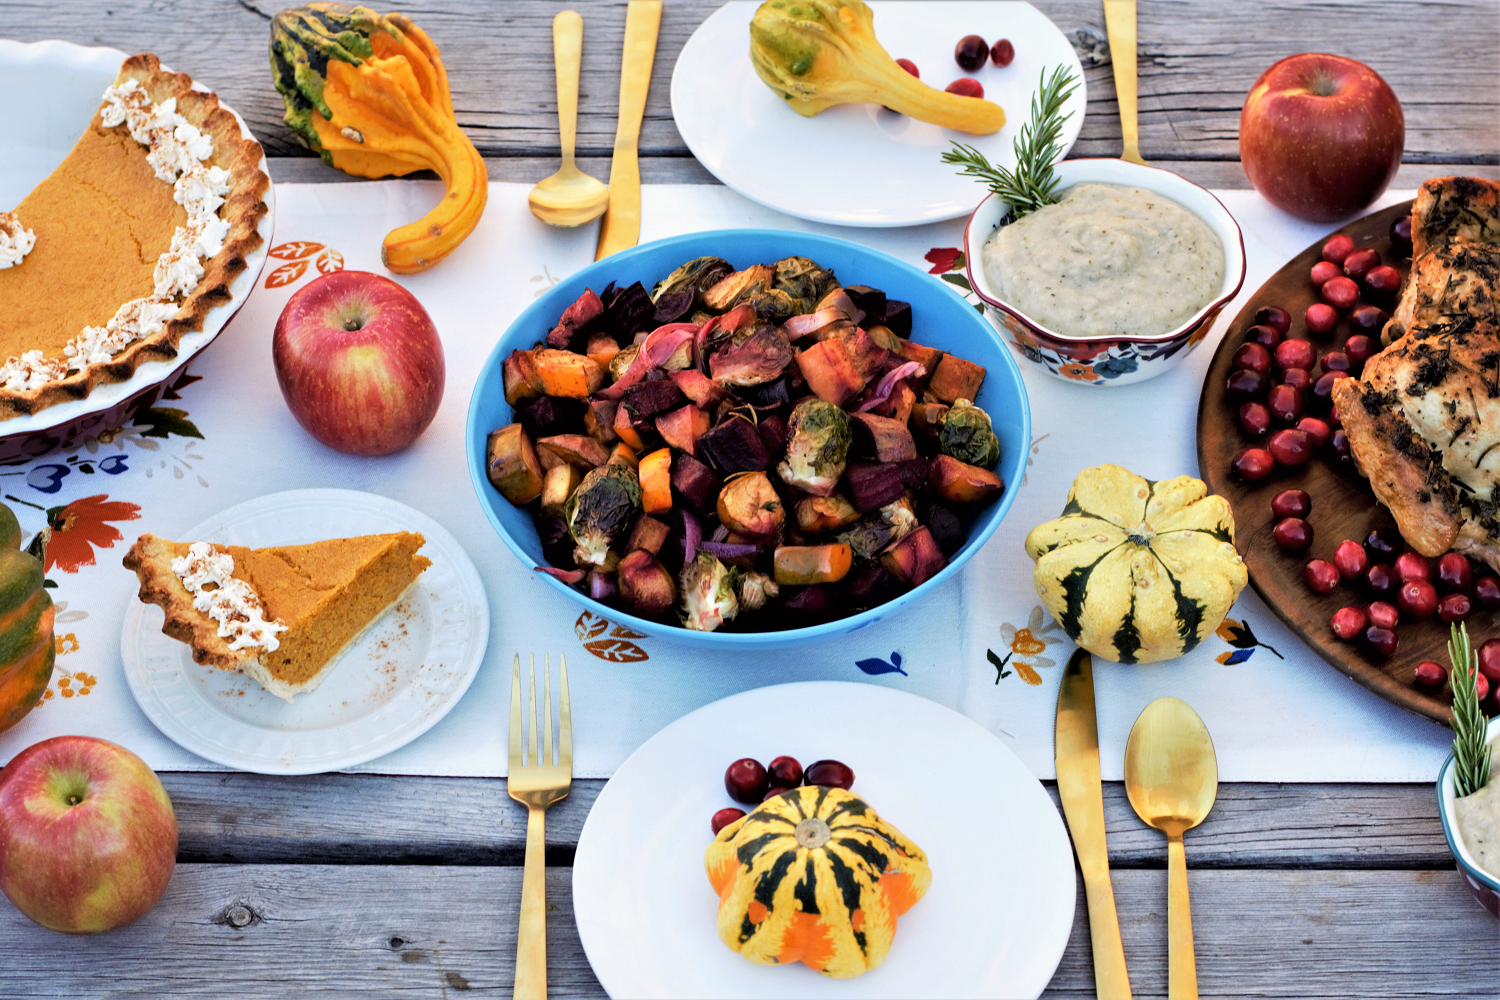 All-in-one guide for hosting a Friendsgiving feast: perfectly roasted chicken, garlic parmesan mashed potatoes, maple balsamic roasted veggies, & bourbon pumpkin pie!